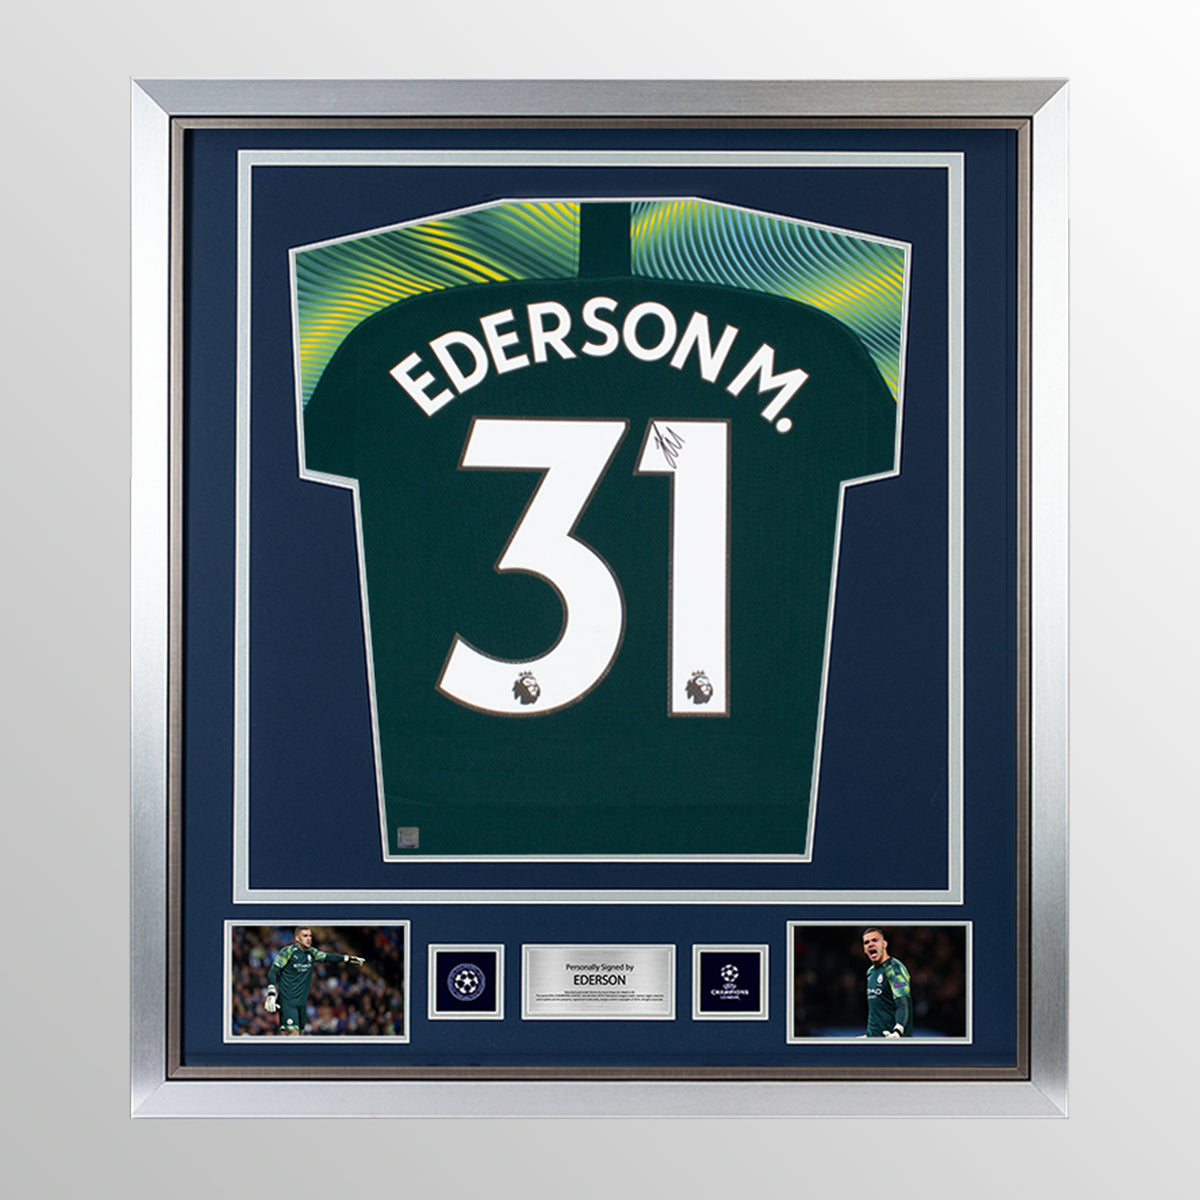 Ederson Official UEFA Champions League Back Signed and Framed Manchester City 2019-20 Home Shirt UEFA Club Competitions Online Store